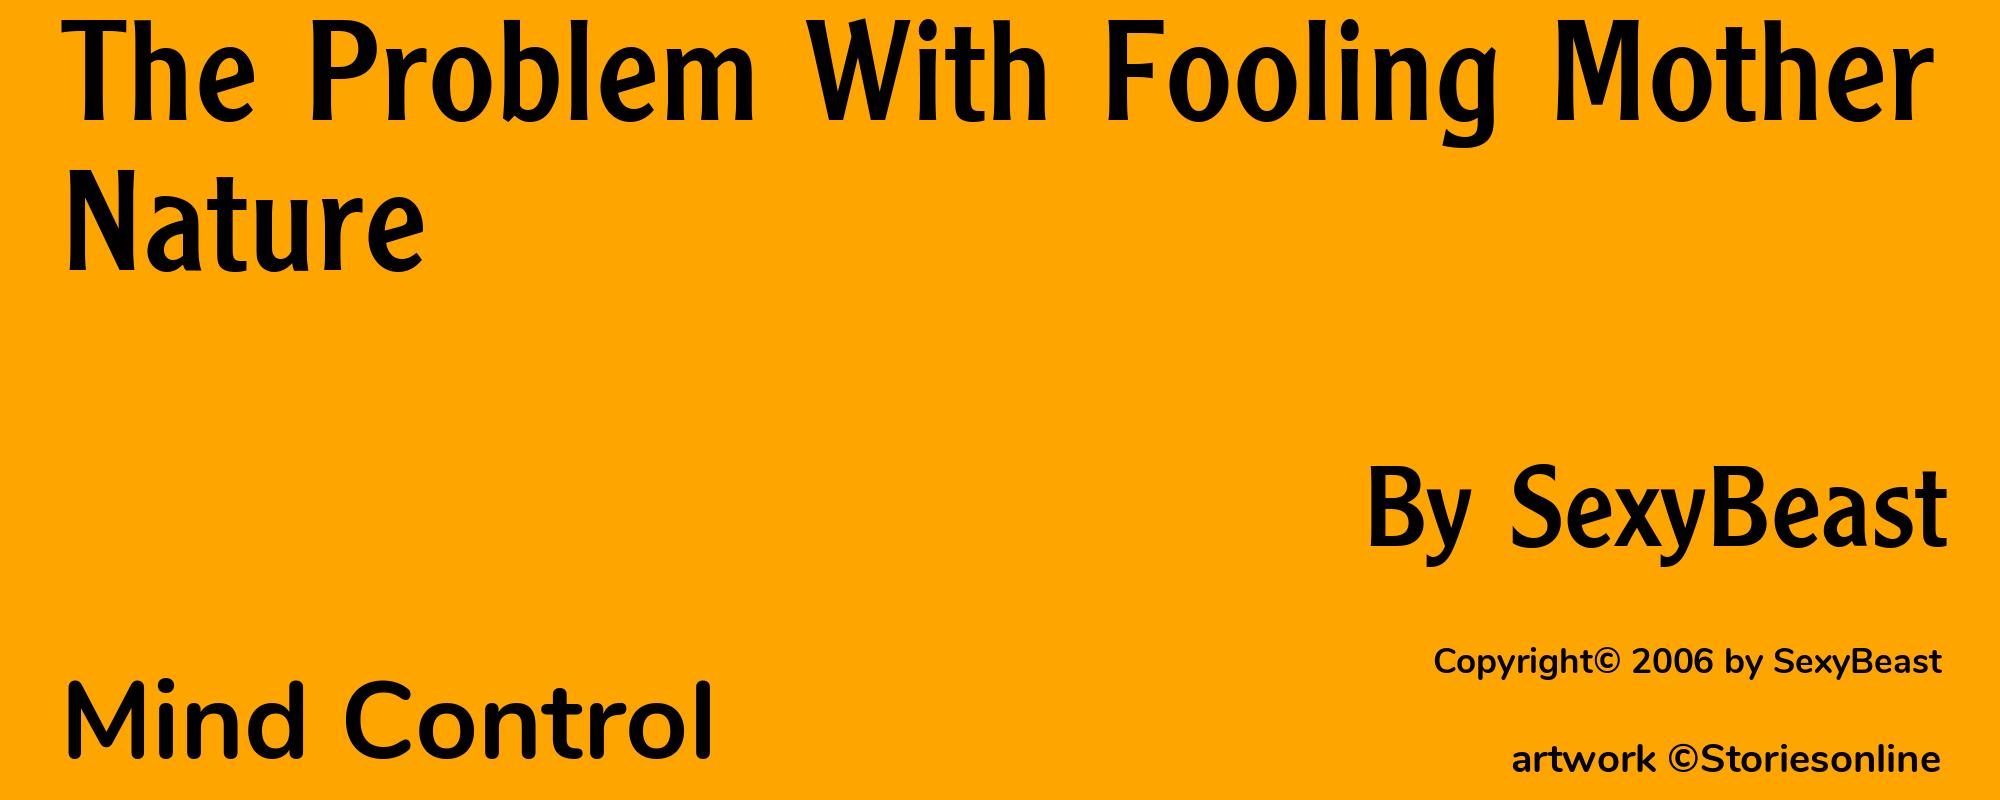 The Problem With Fooling Mother Nature - Cover